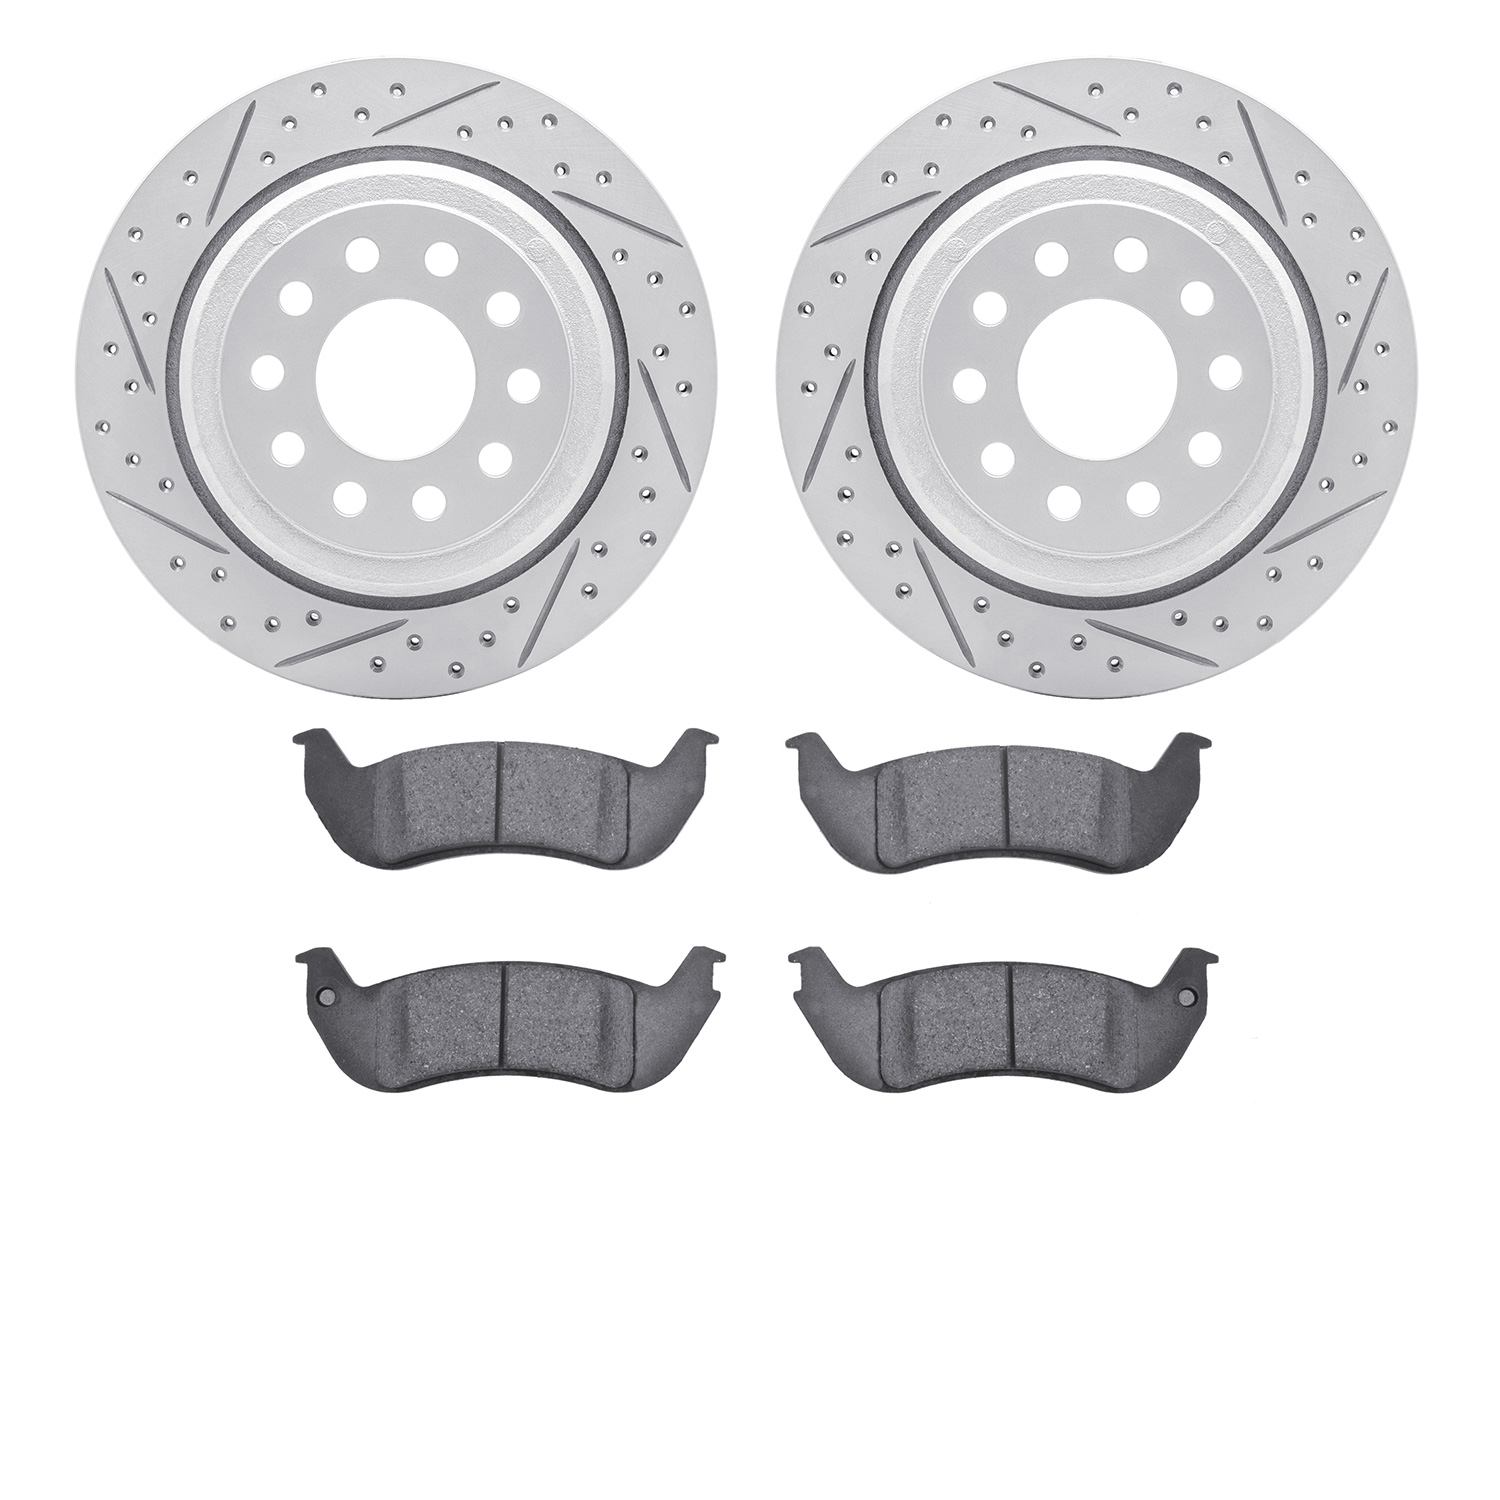 2202-55001 Geoperformance Drilled/Slotted Rotors w/Heavy-Duty Pads Kit, 2003-2011 Ford/Lincoln/Mercury/Mazda, Position: Rear